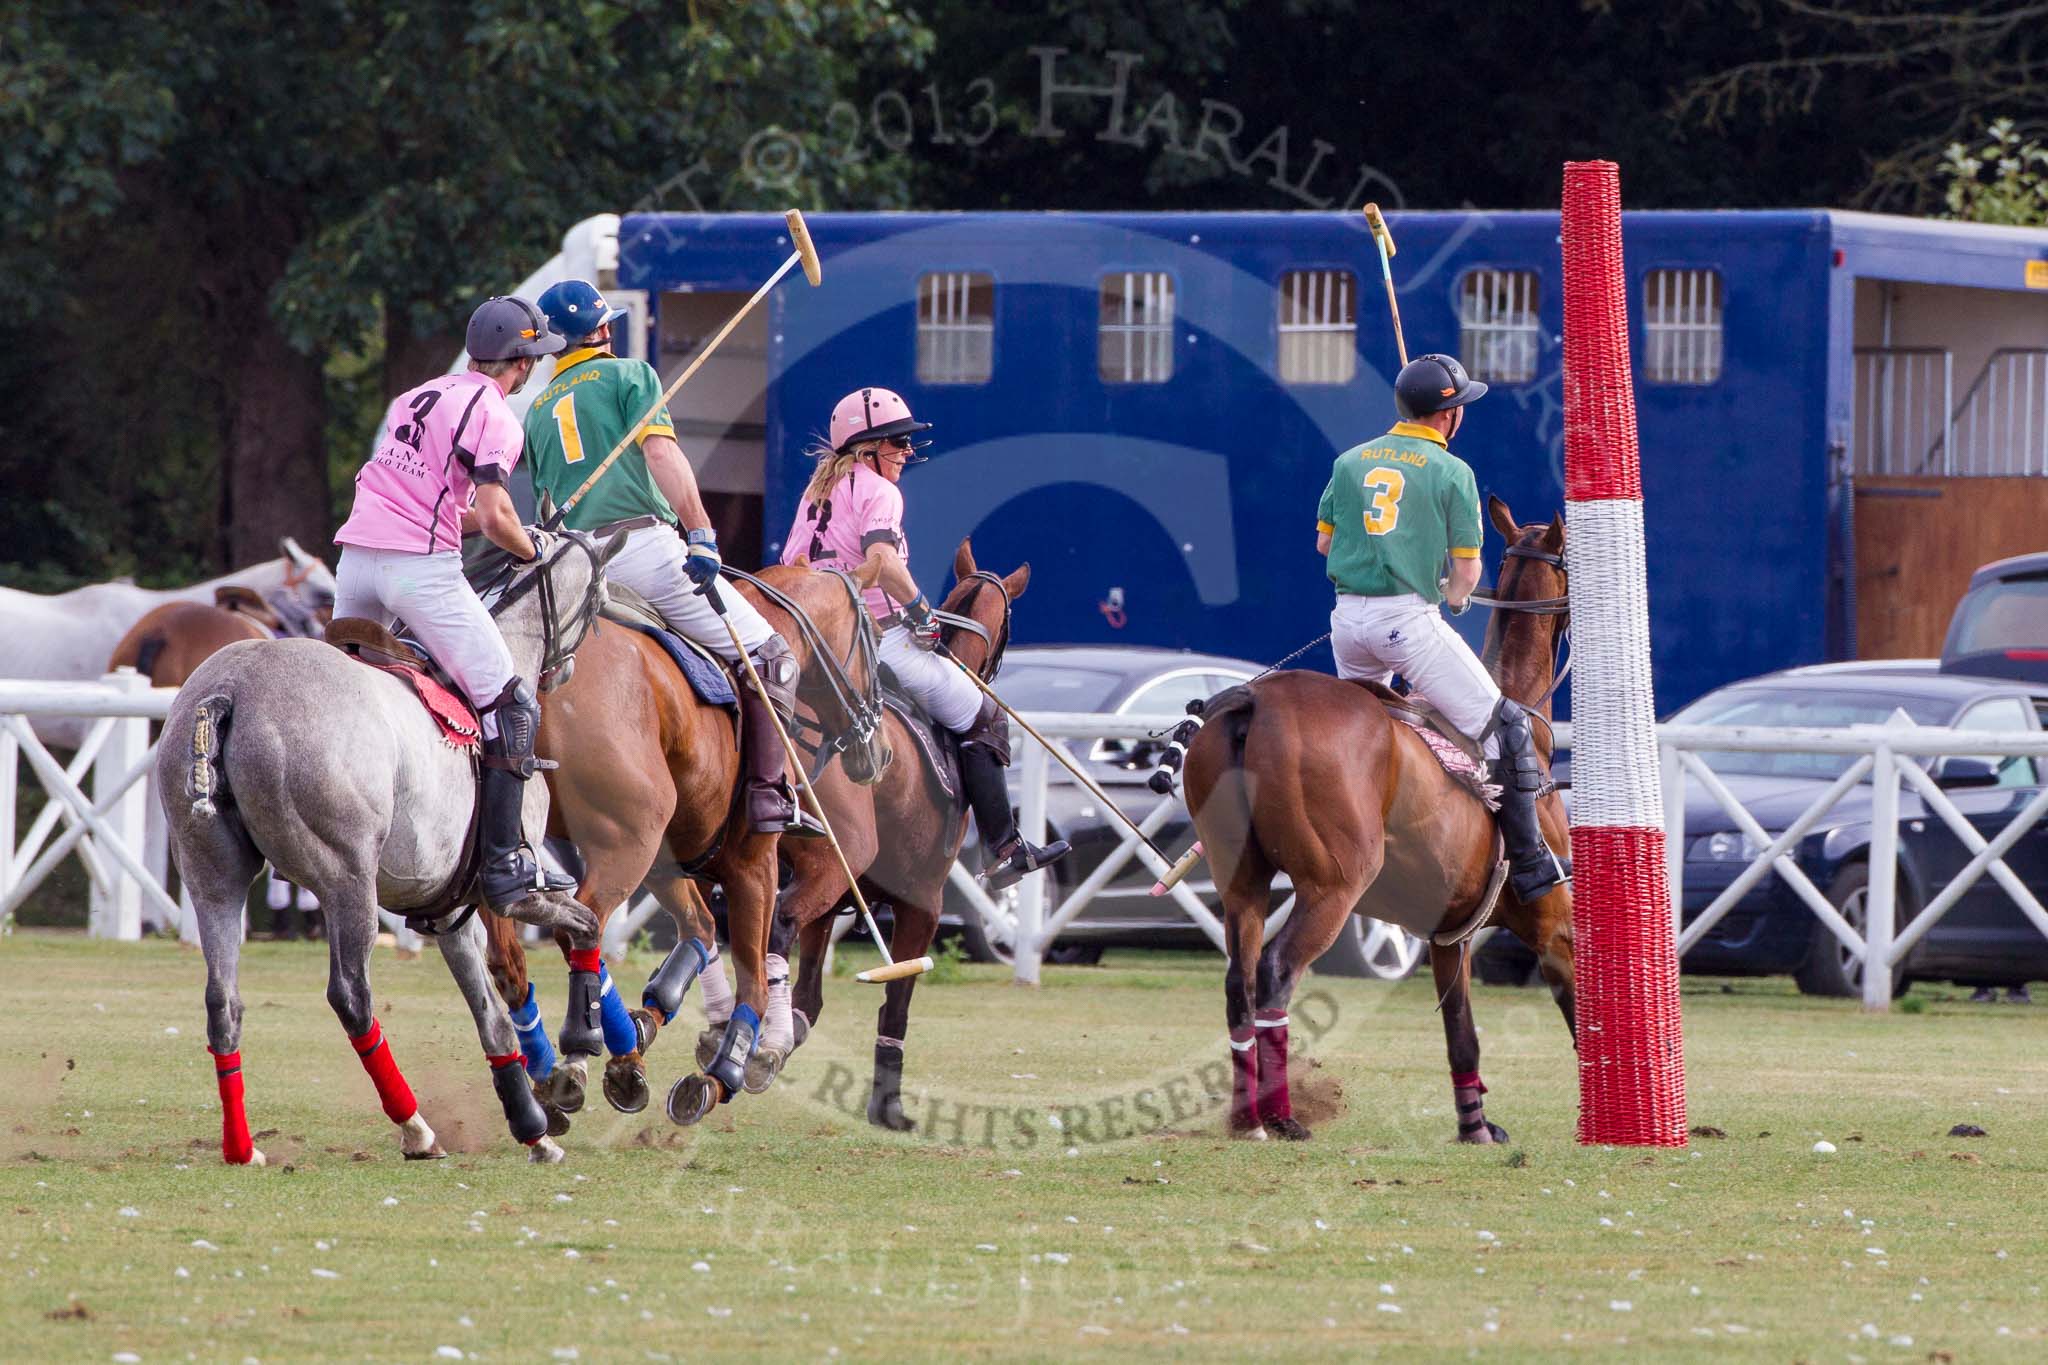 DBPC Polo in the Park 2013, Final of the Tusk Trophy (4 Goals), Rutland vs C.A.N.I..
Dallas Burston Polo Club, ,
Southam,
Warwickshire,
United Kingdom,
on 01 September 2013 at 16:41, image #609